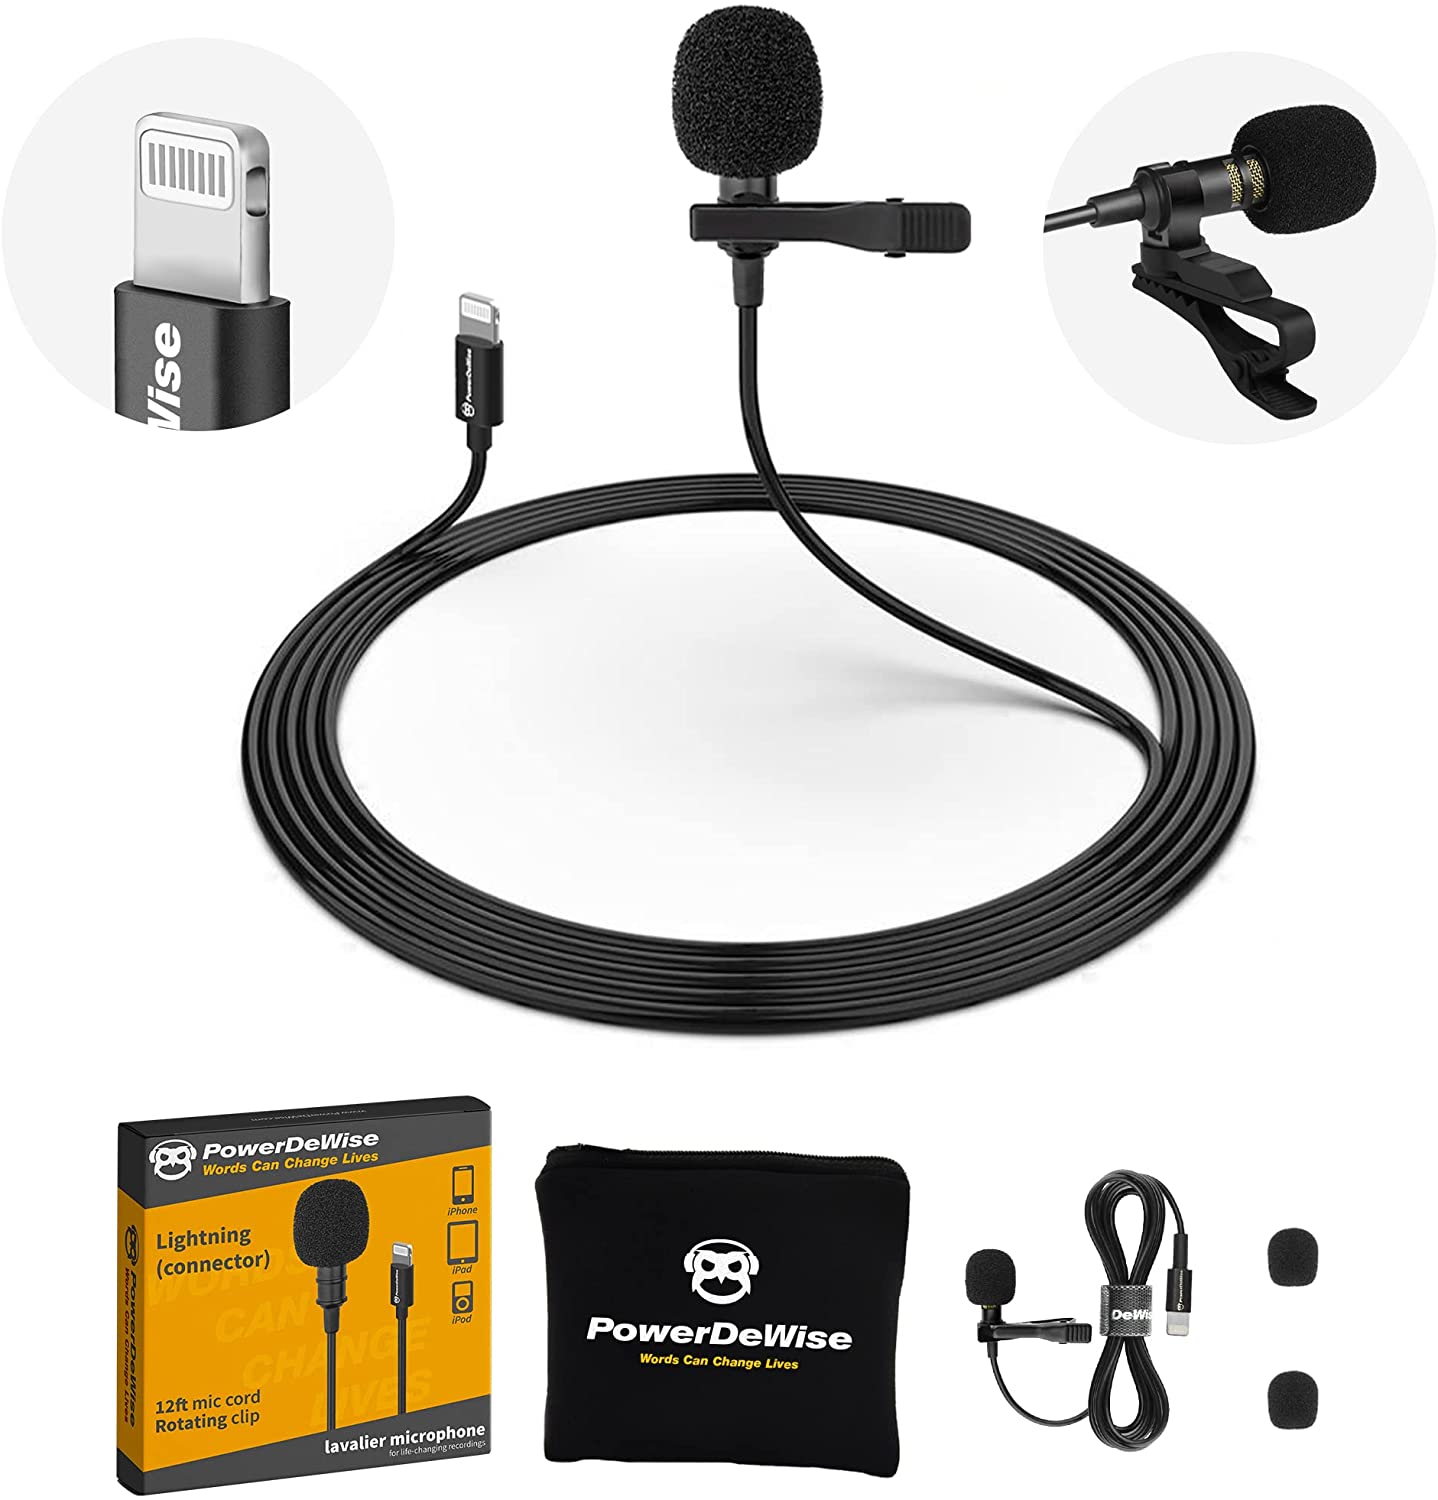 Professional Grade External Lavalier Microphone for iPhone iPad iPod